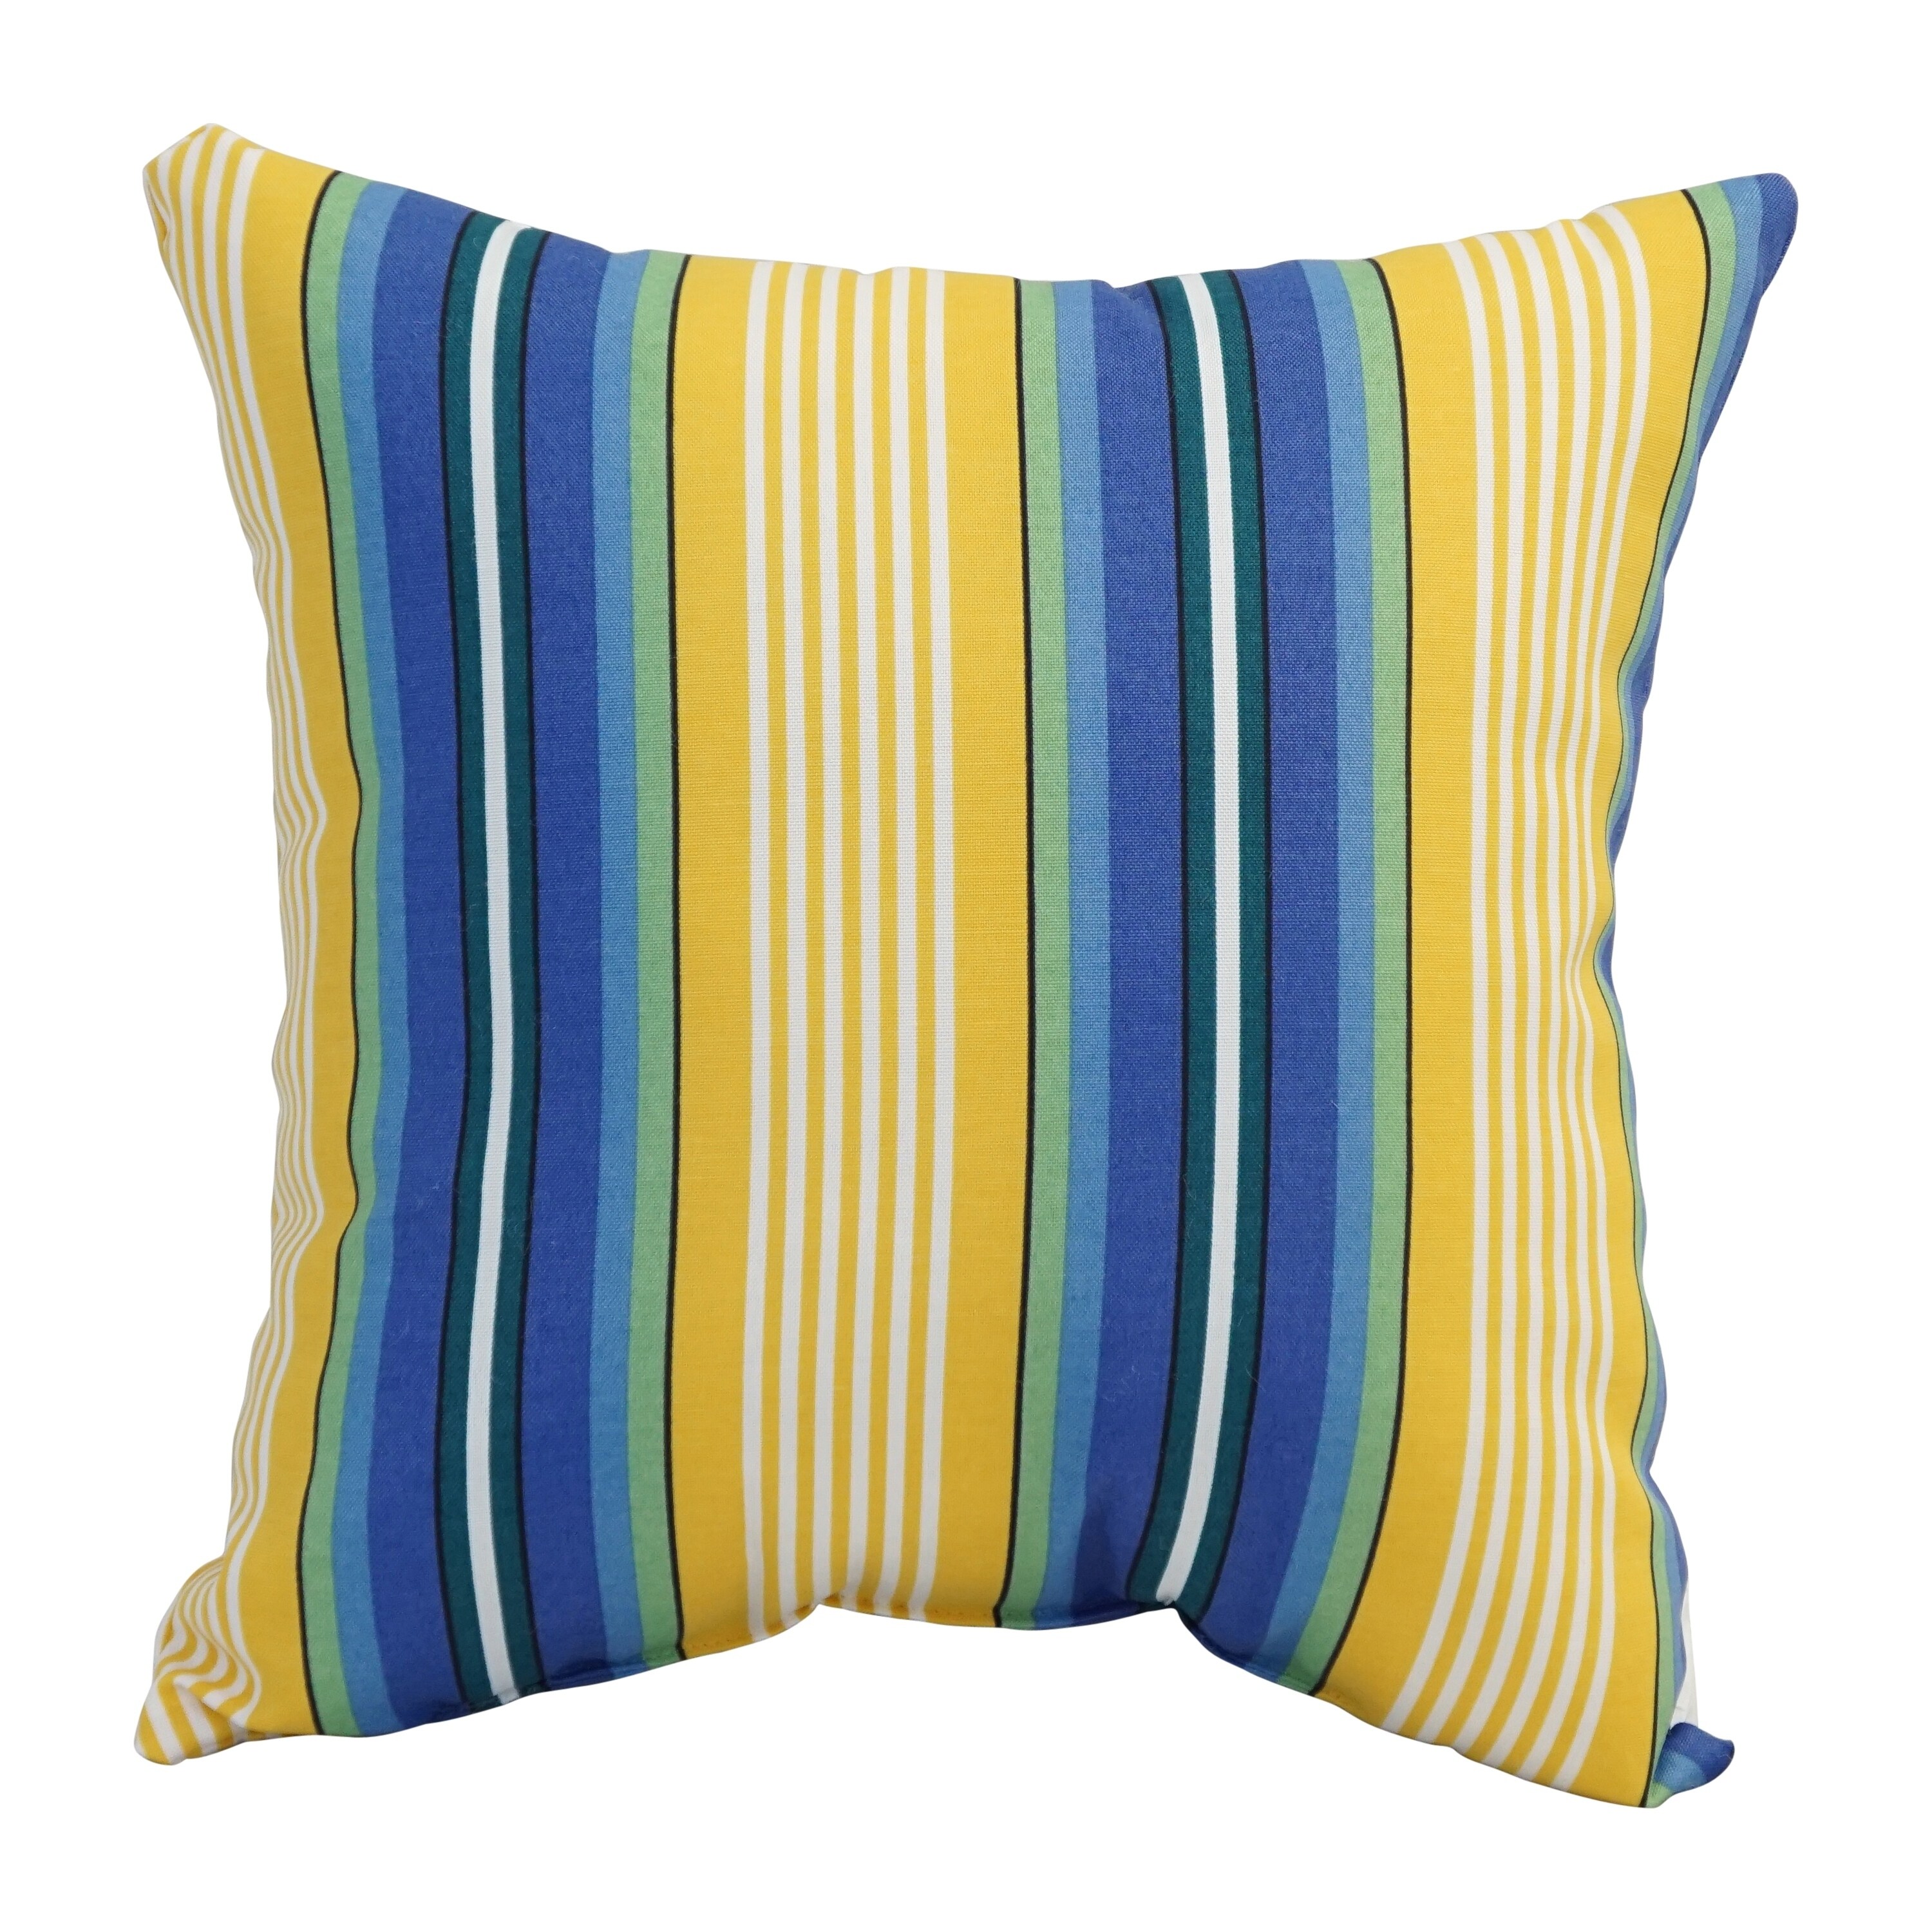 17-inch Square Polyester Outdoor Throw Pillows (Set of 2)